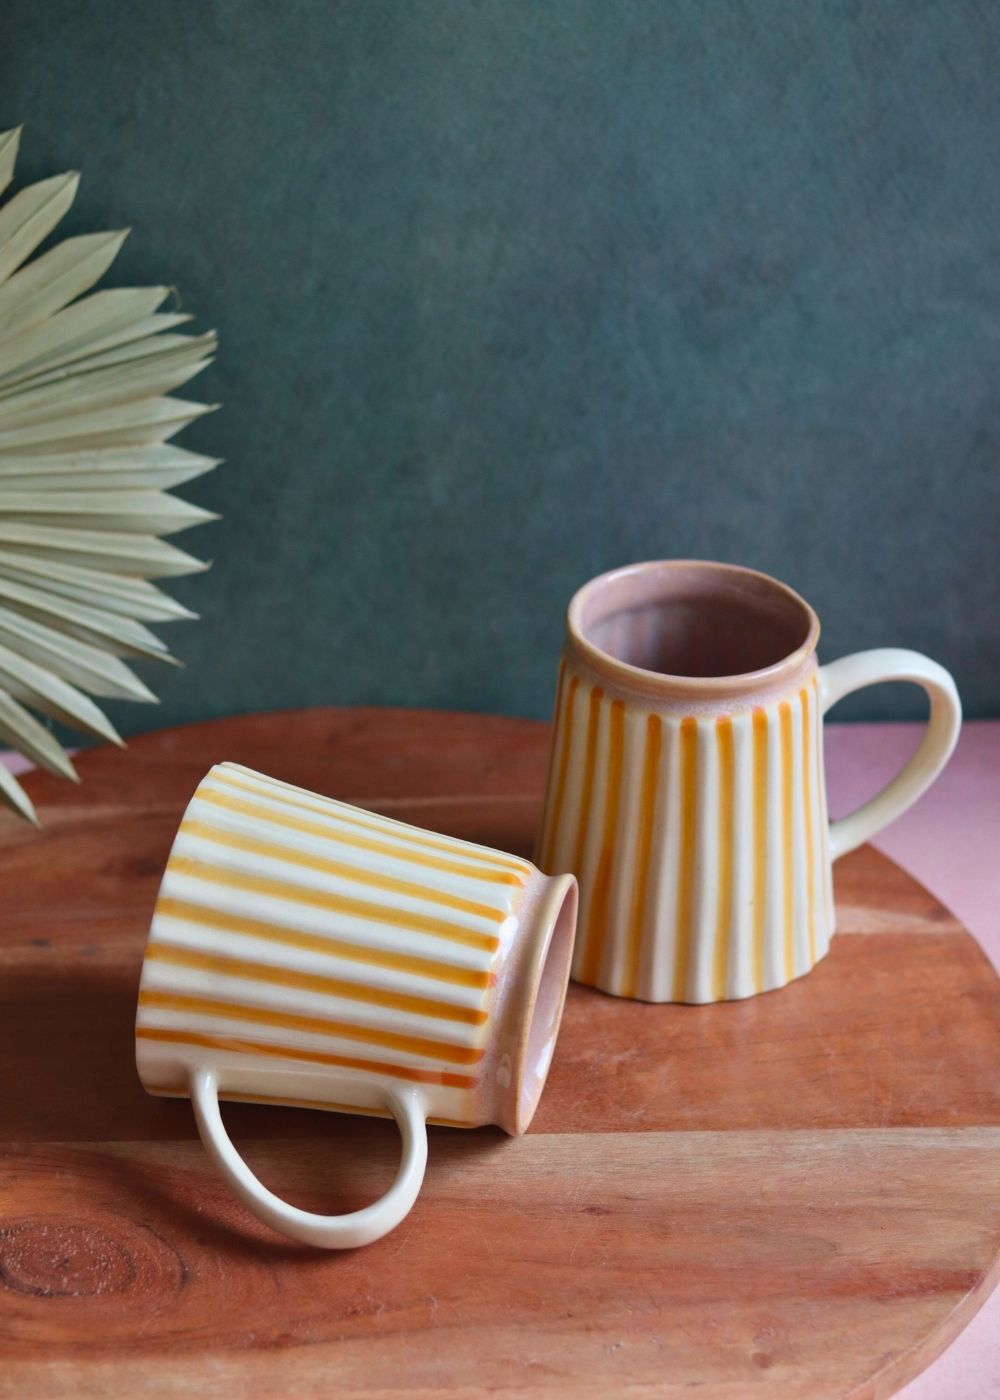 striped yellow mug with premium quality material